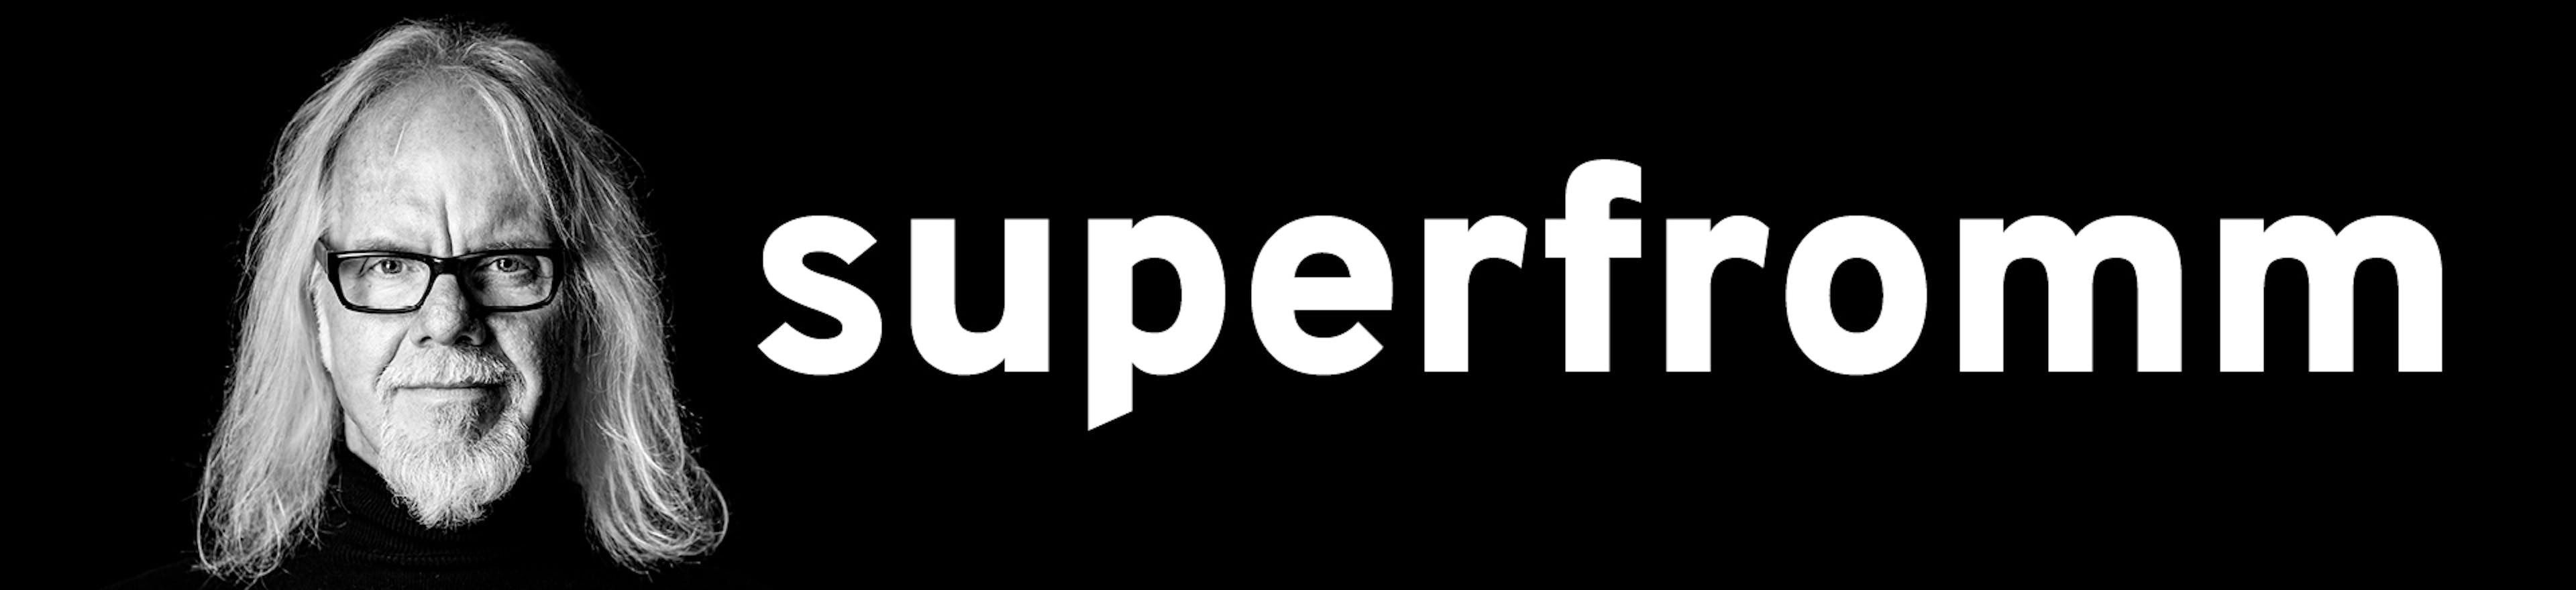 Superfromm